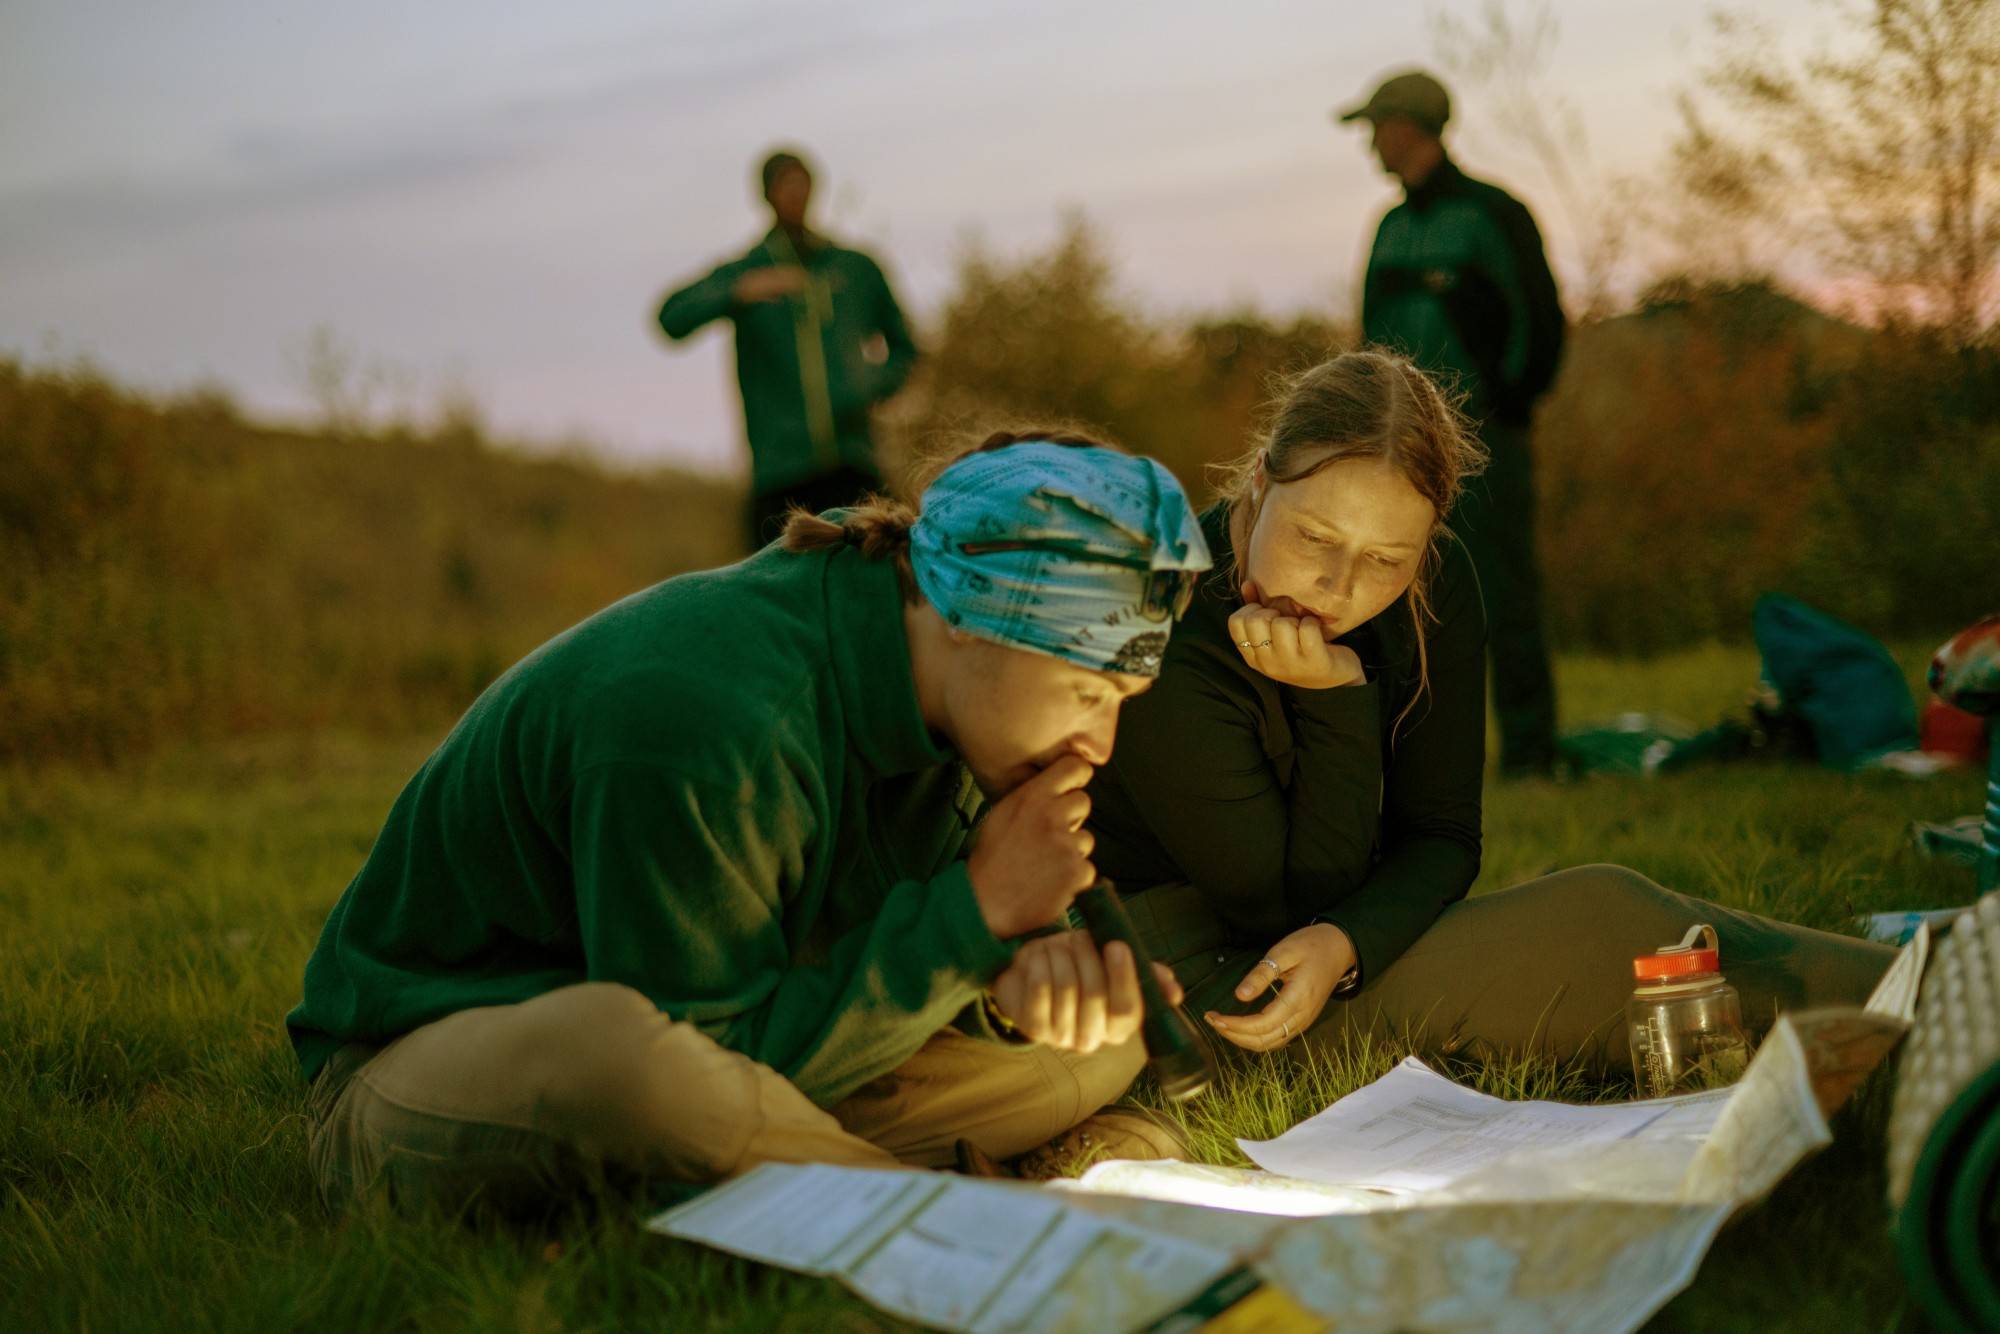 Garrison Beale (left) and Anna Hattemer discuss a plan for their turn leading the class. Every student takes turns leading the different days of the trip with minimal advance notice.